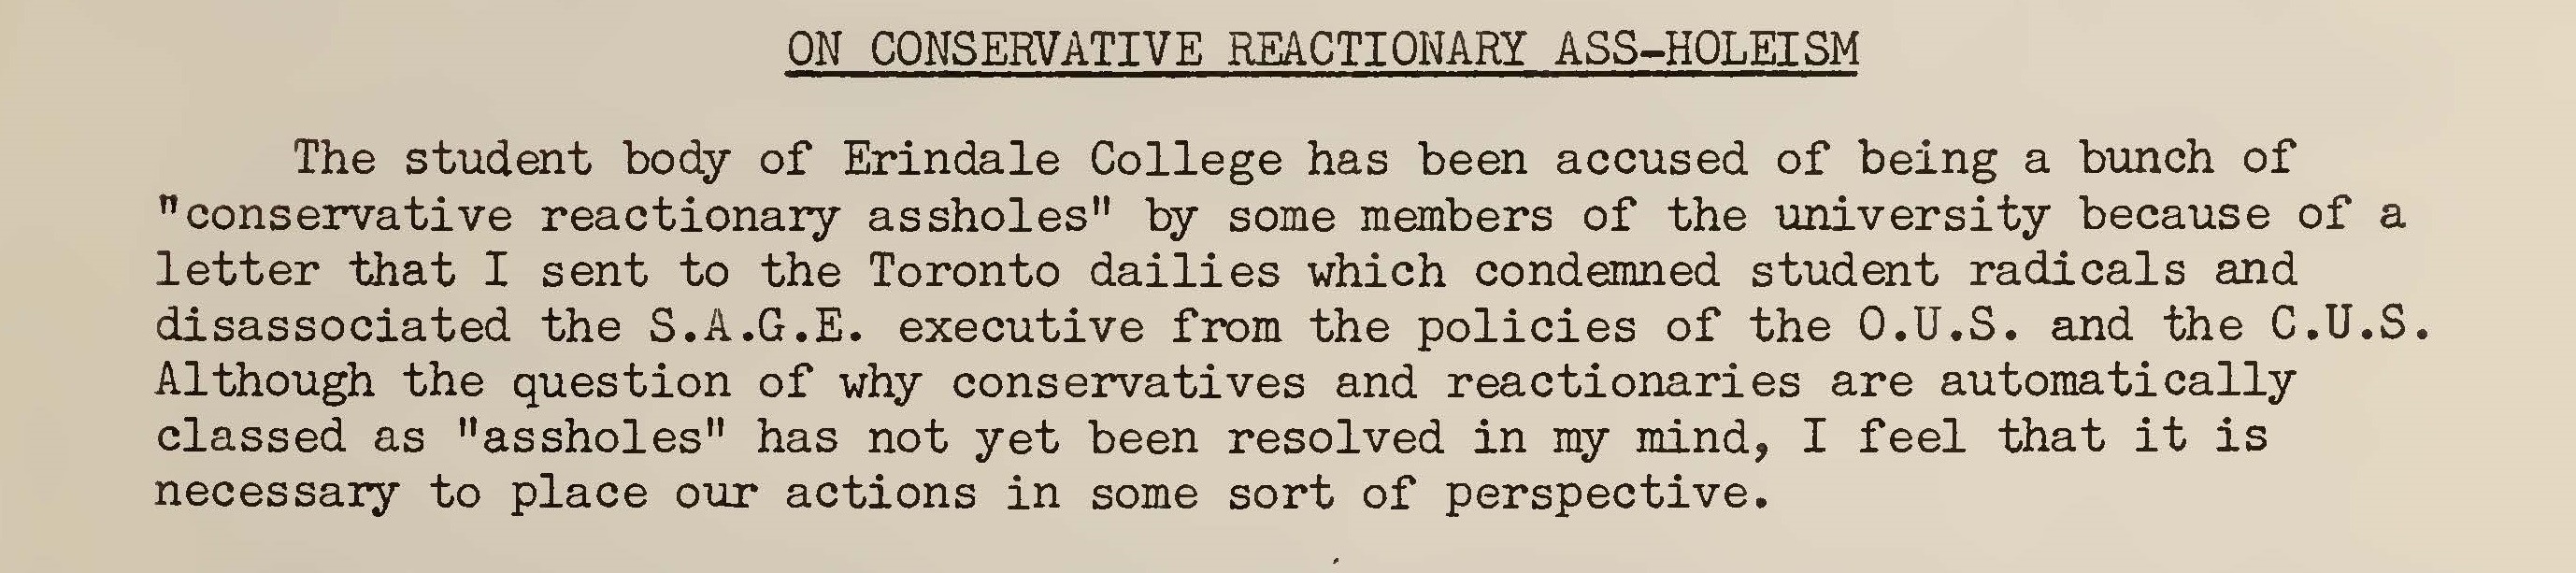 Newspaper article describing how UTM's student body has been accused of being conservative reactionary assholes